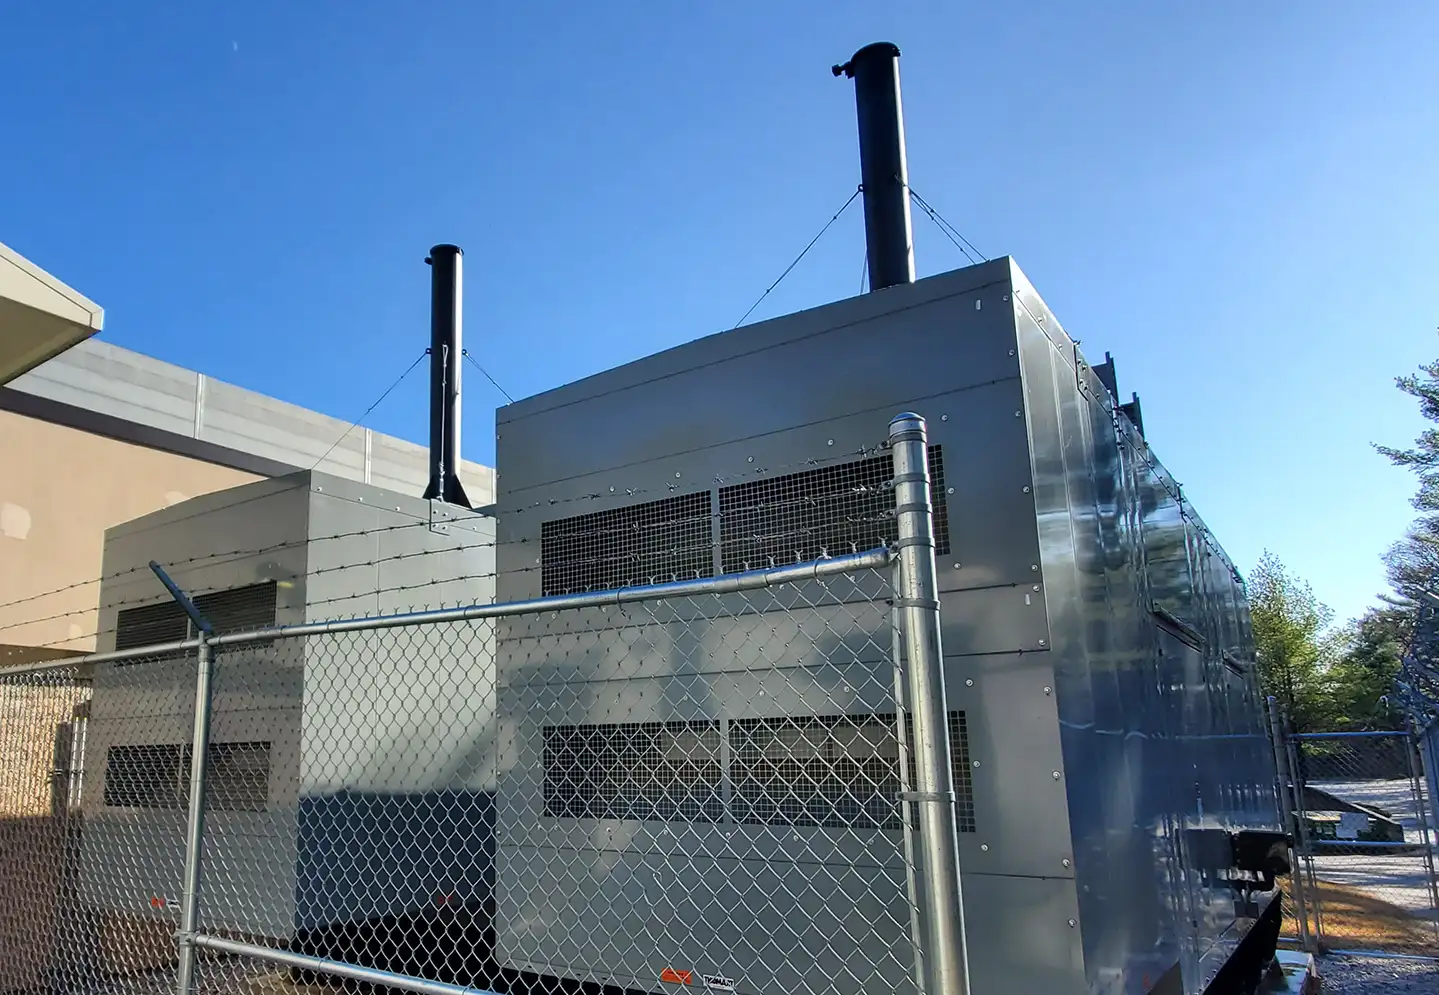 Cannabis Facility Generators with Air Quality Permits